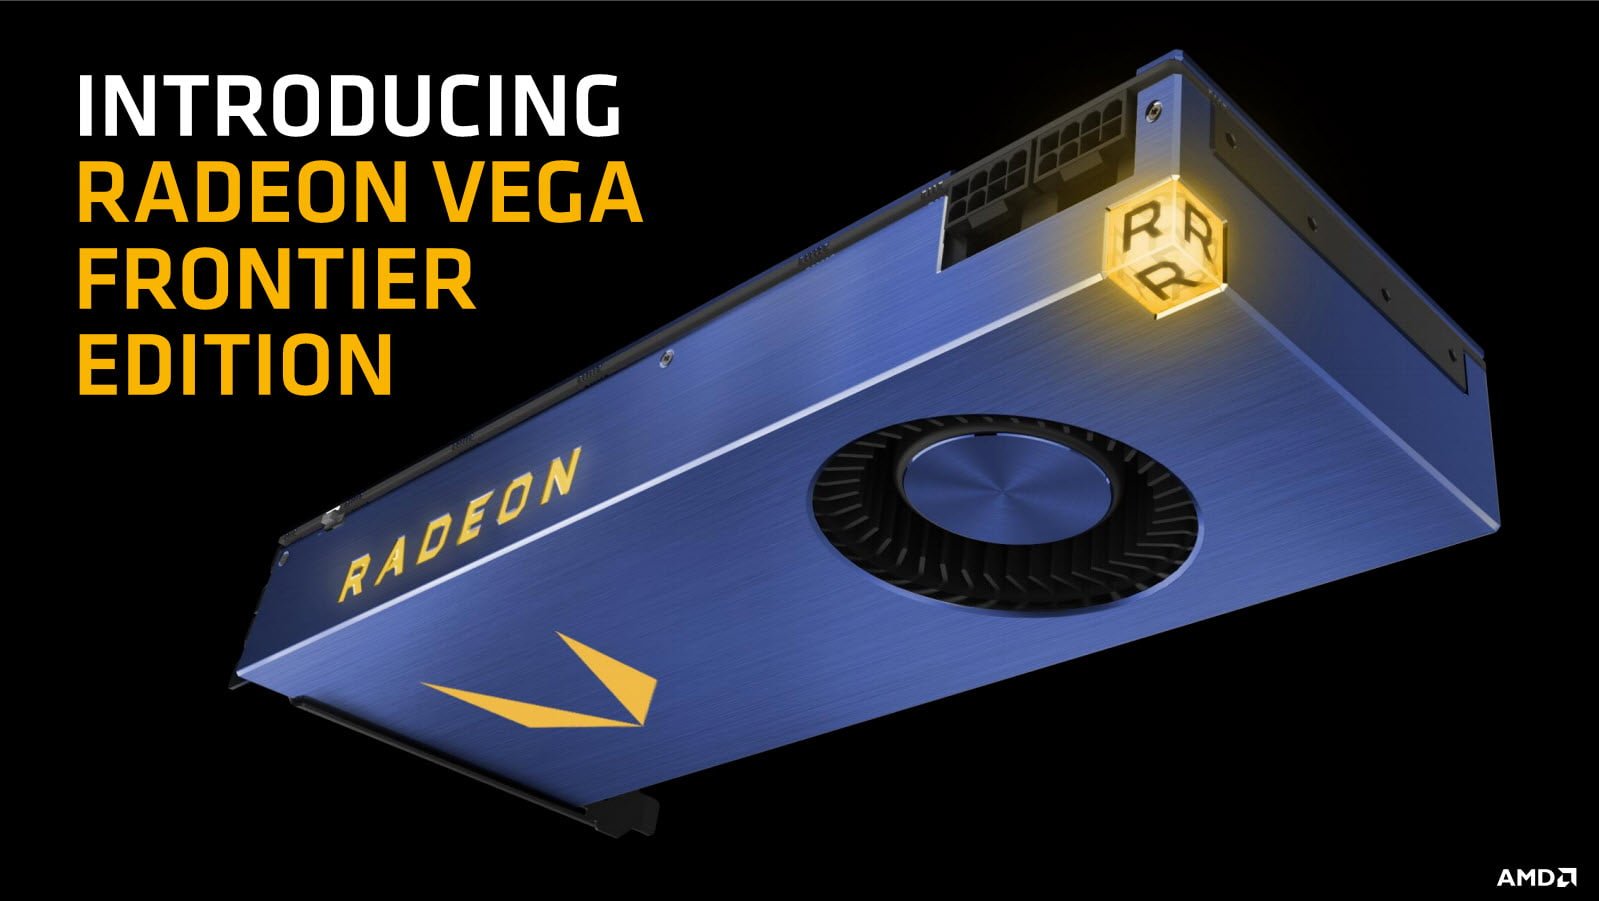 AMD Radeon Vega Frontier Edition Now Available for Preorder